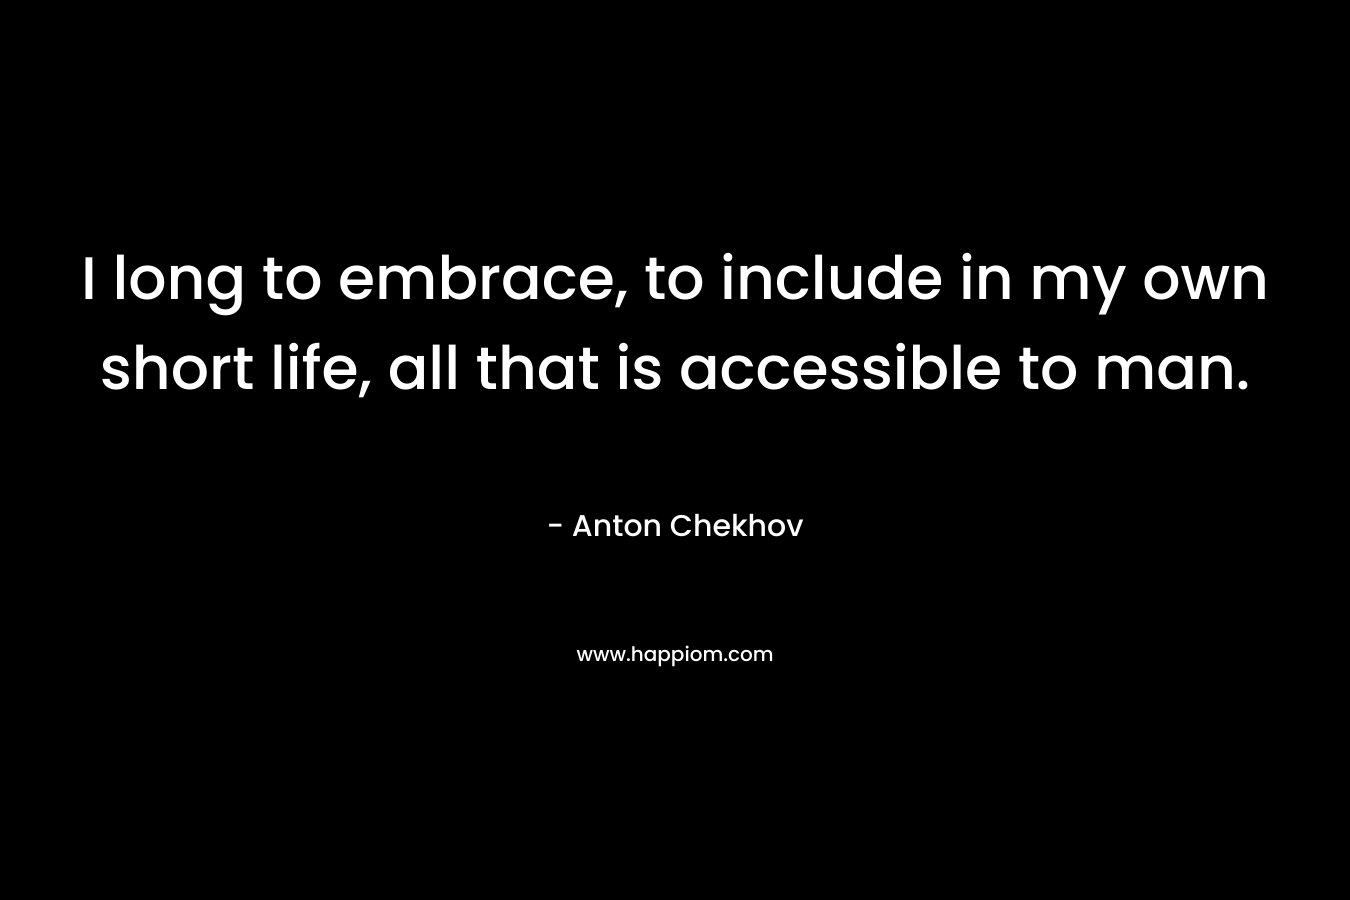 I long to embrace, to include in my own short life, all that is accessible to man.